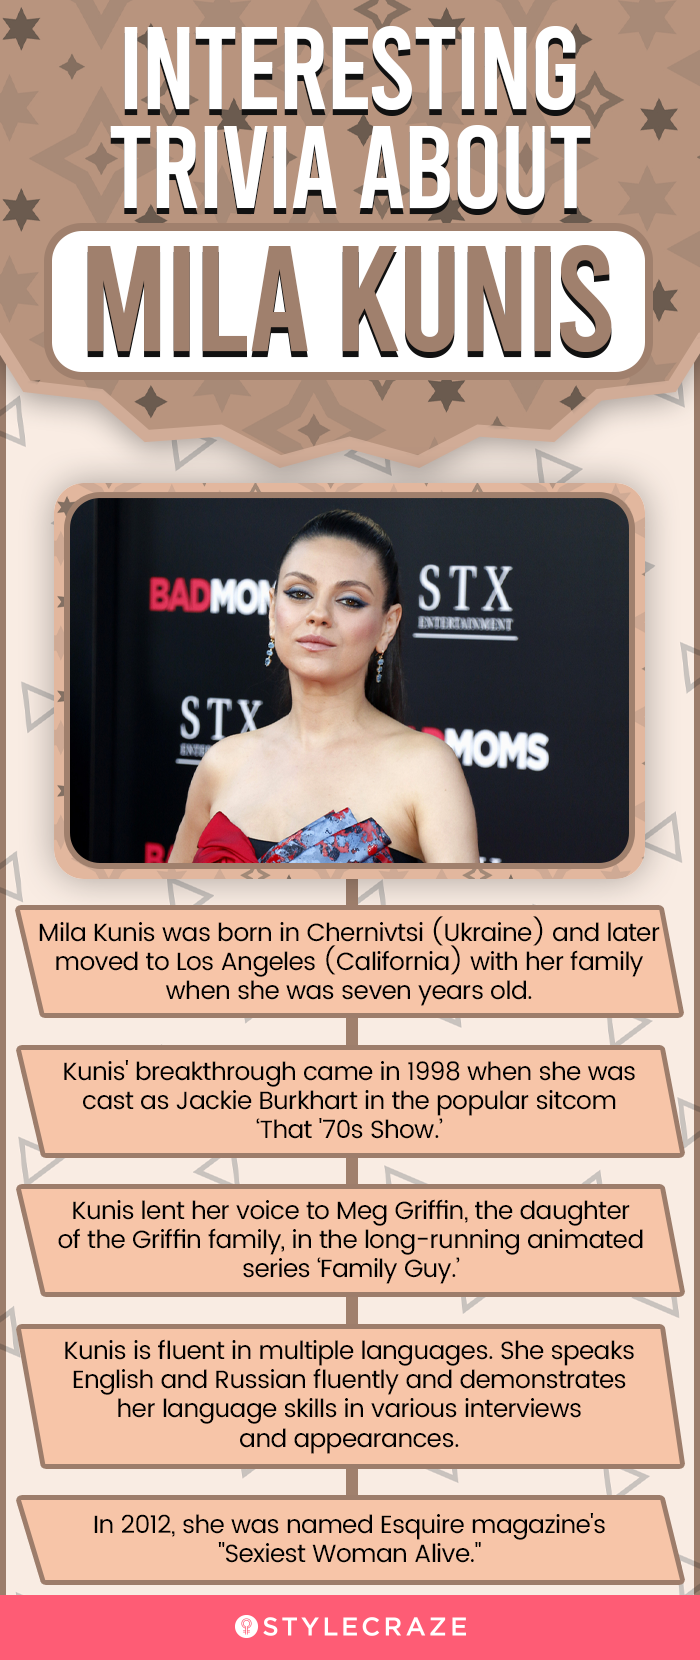 trivia about mila kunis (infographic)